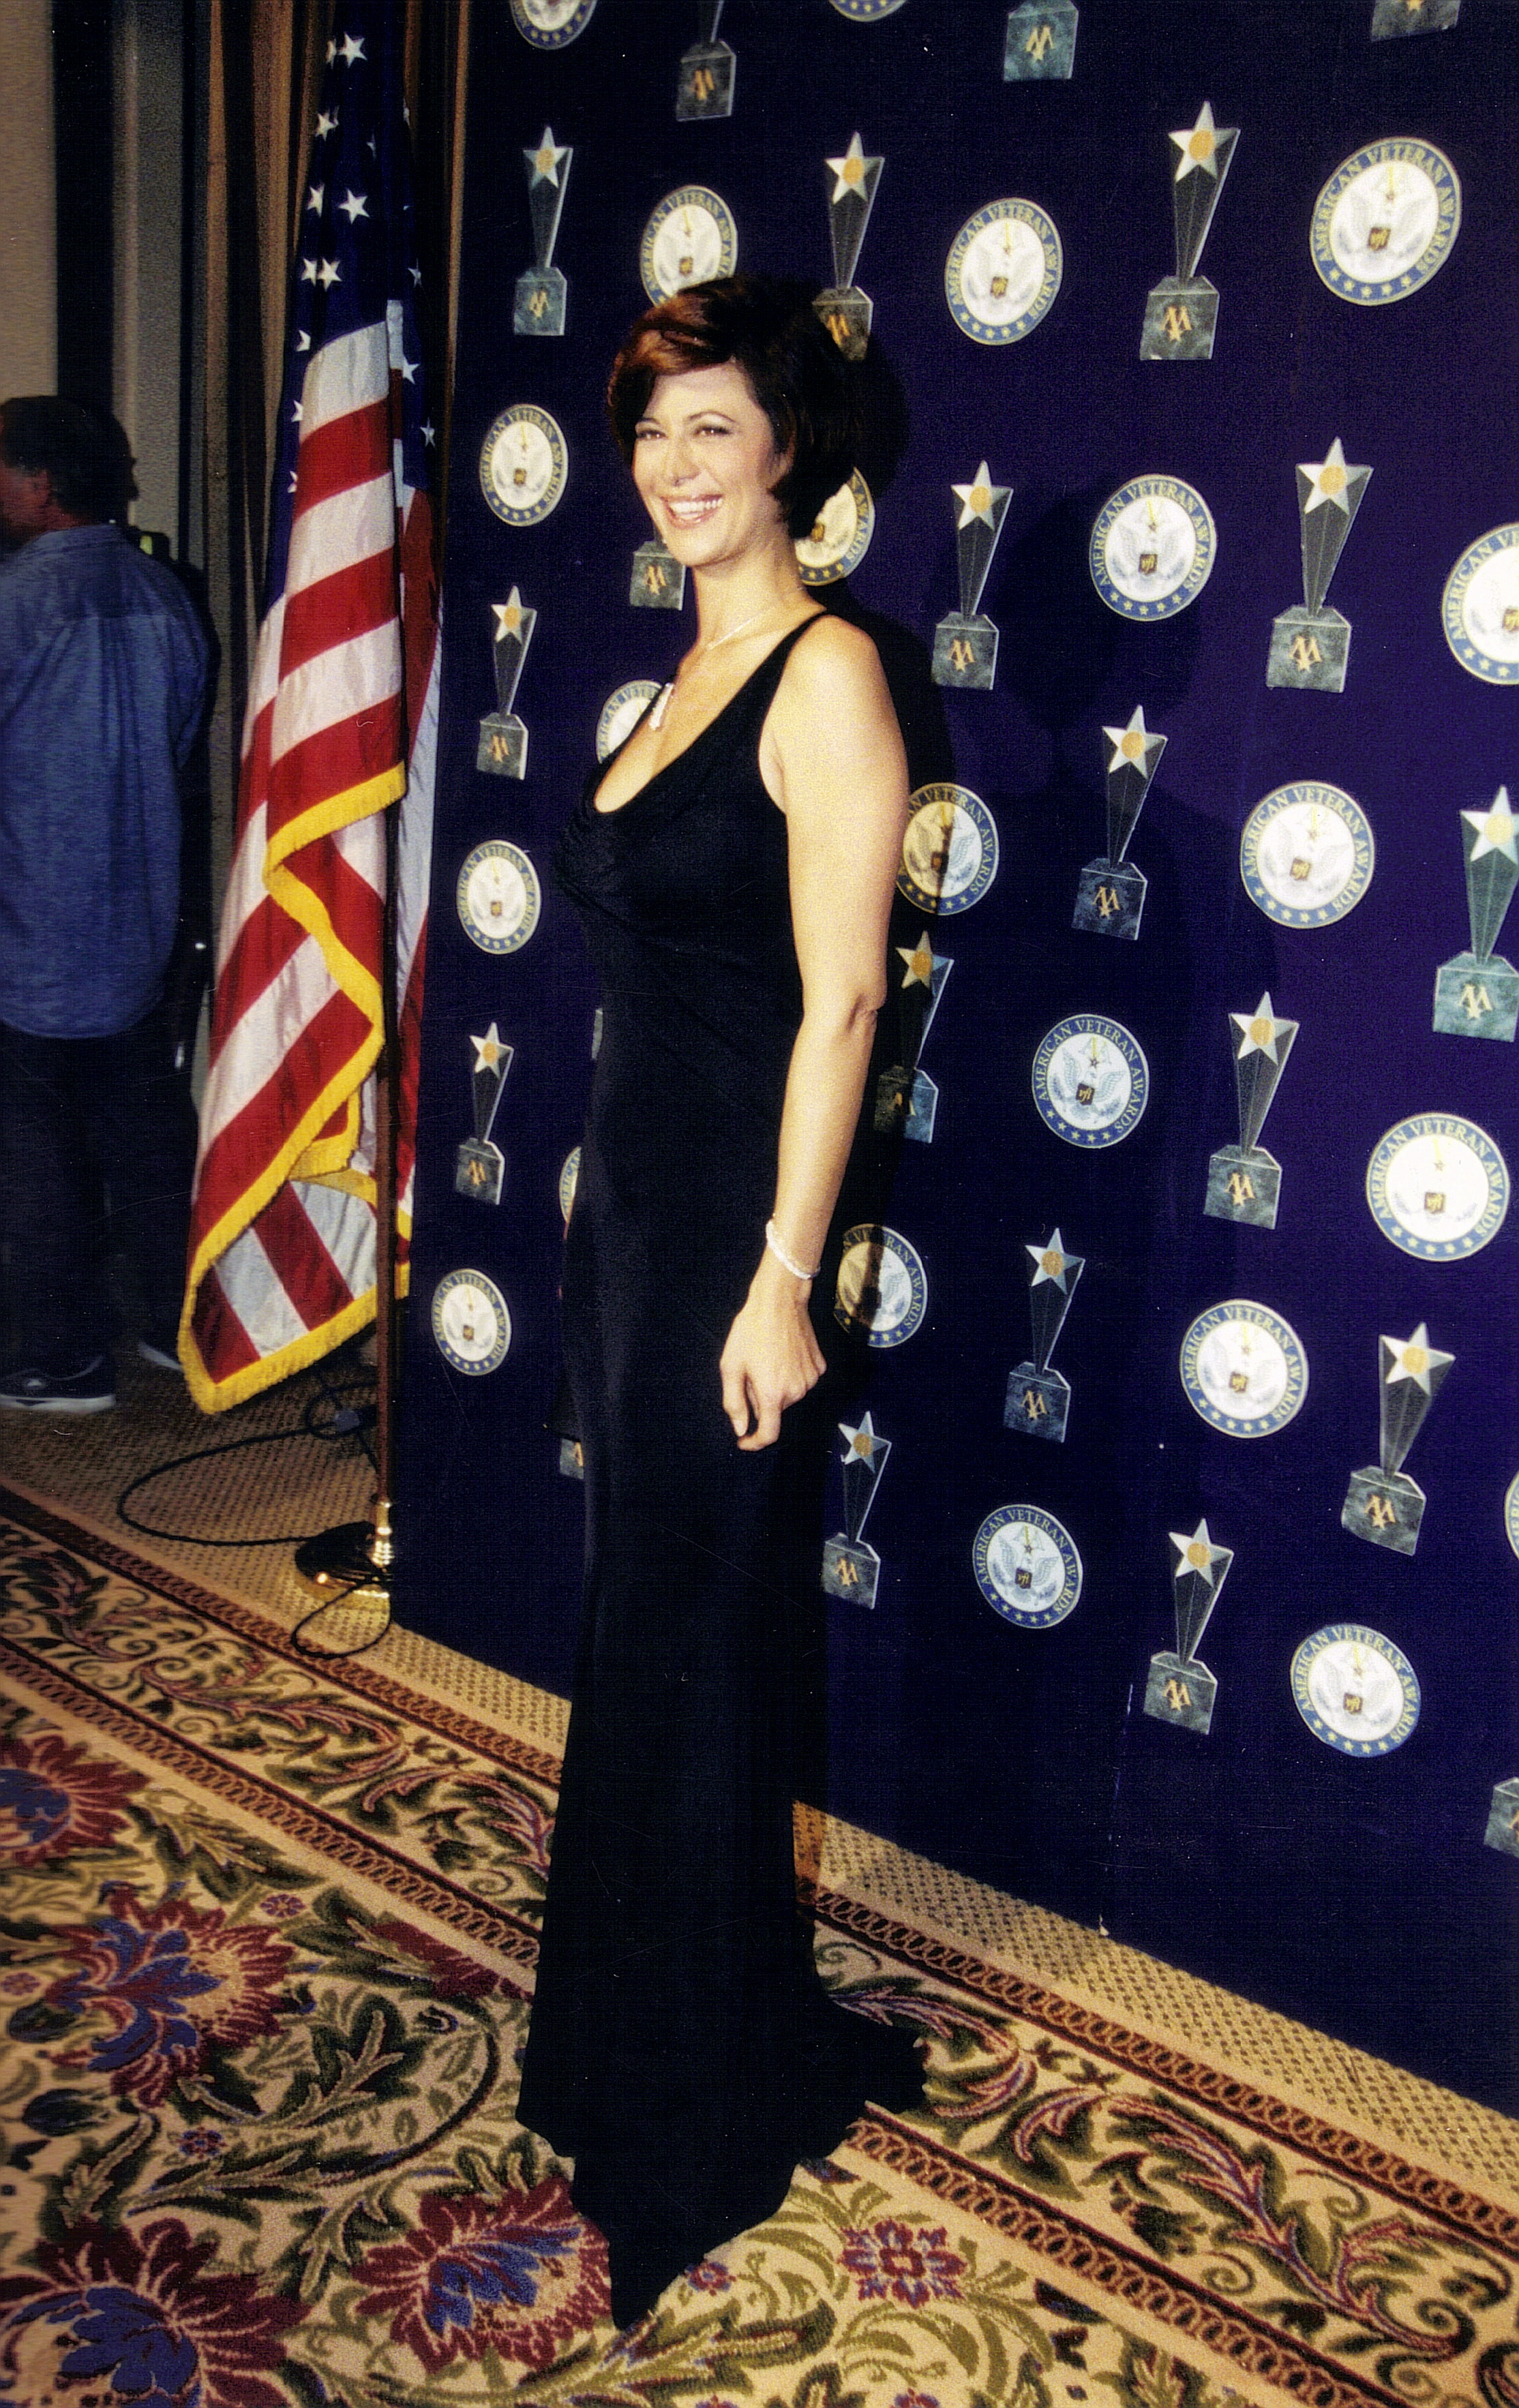 The stunning Catherine Bell has always been a tremendous supporter of our military, veterans and their families and children